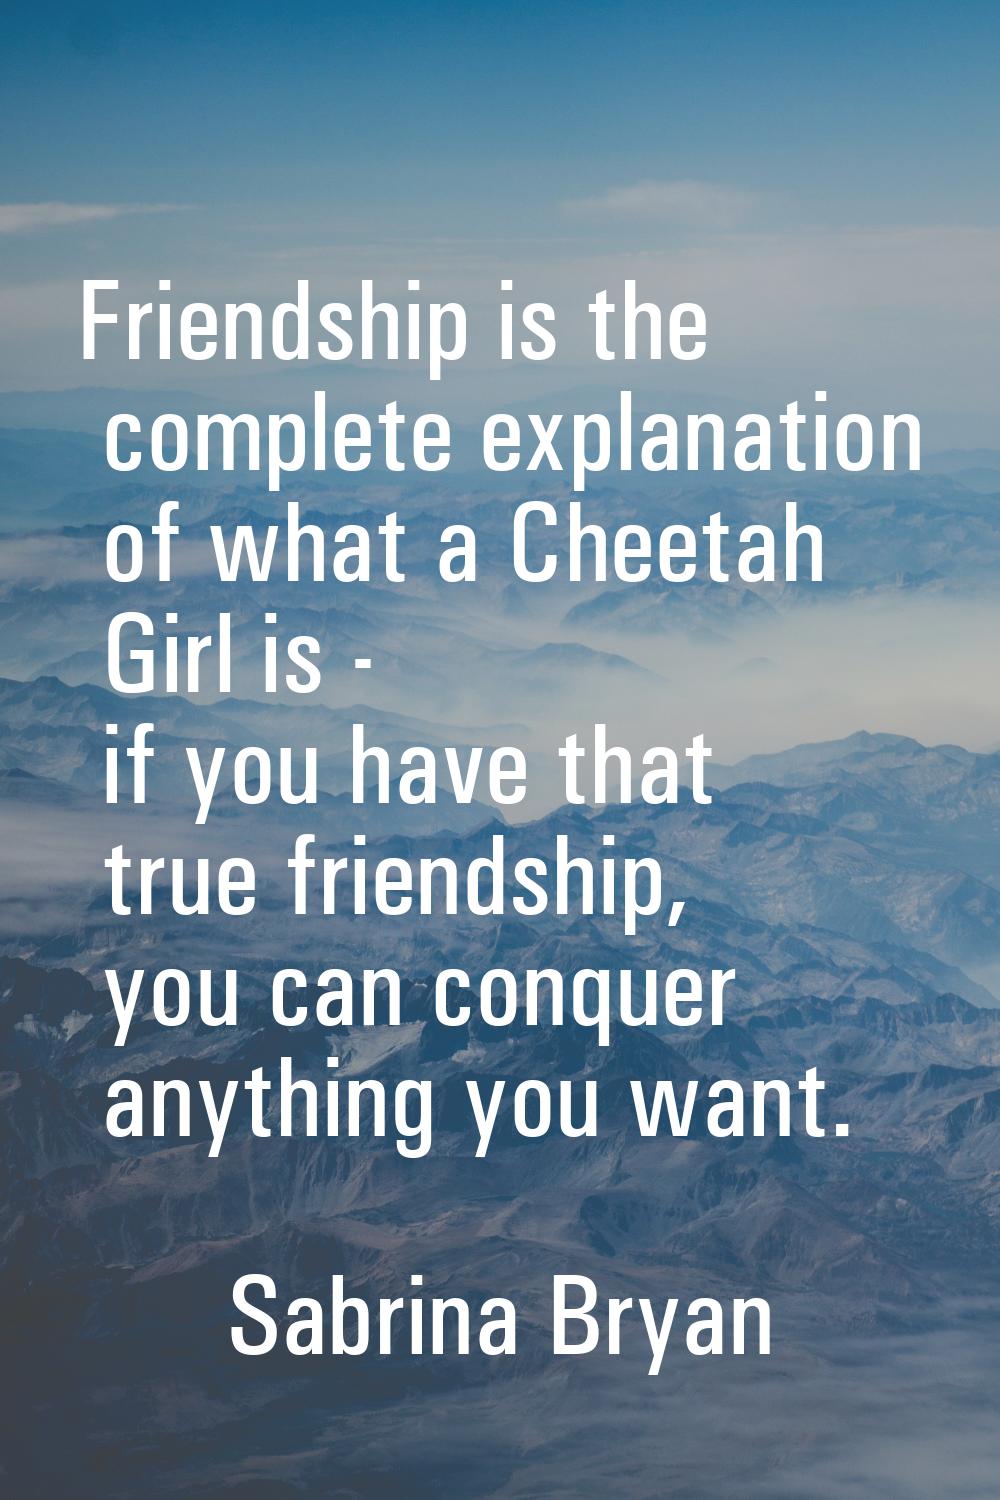 Friendship is the complete explanation of what a Cheetah Girl is - if you have that true friendship